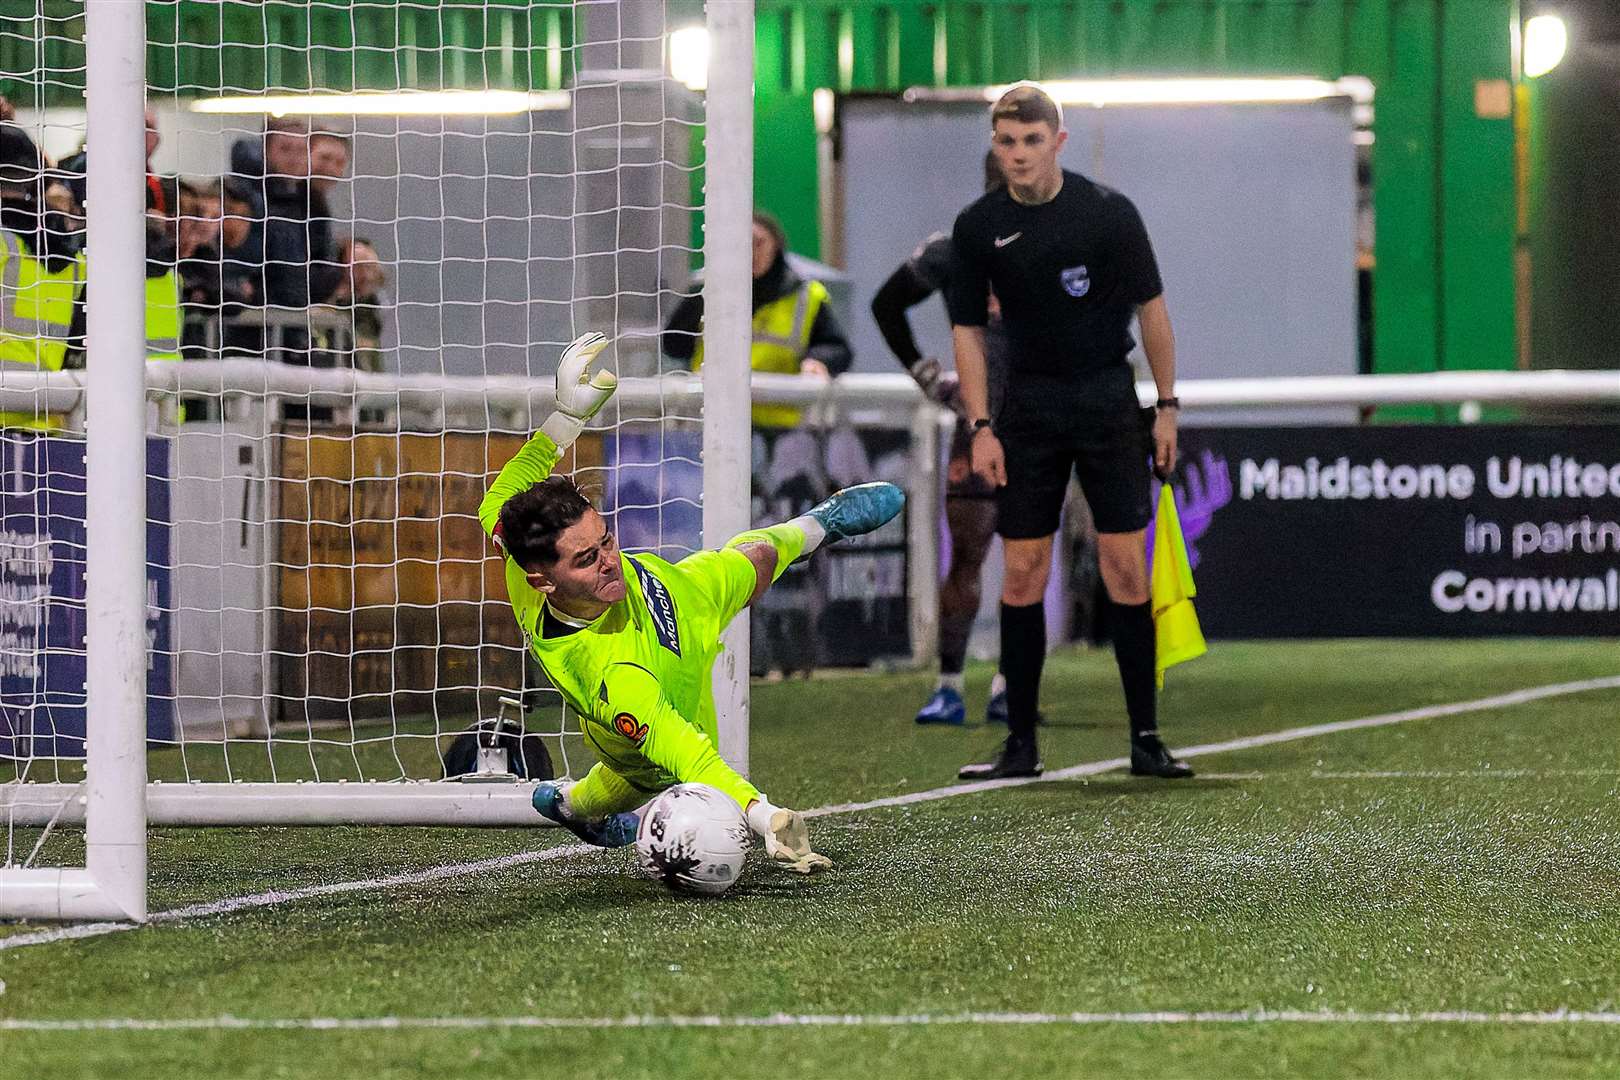 Harley Earle saves from the spot against Punjab to send Maidstone through to the Kent Senior Cup semi-finals. Picture: Helen Cooper